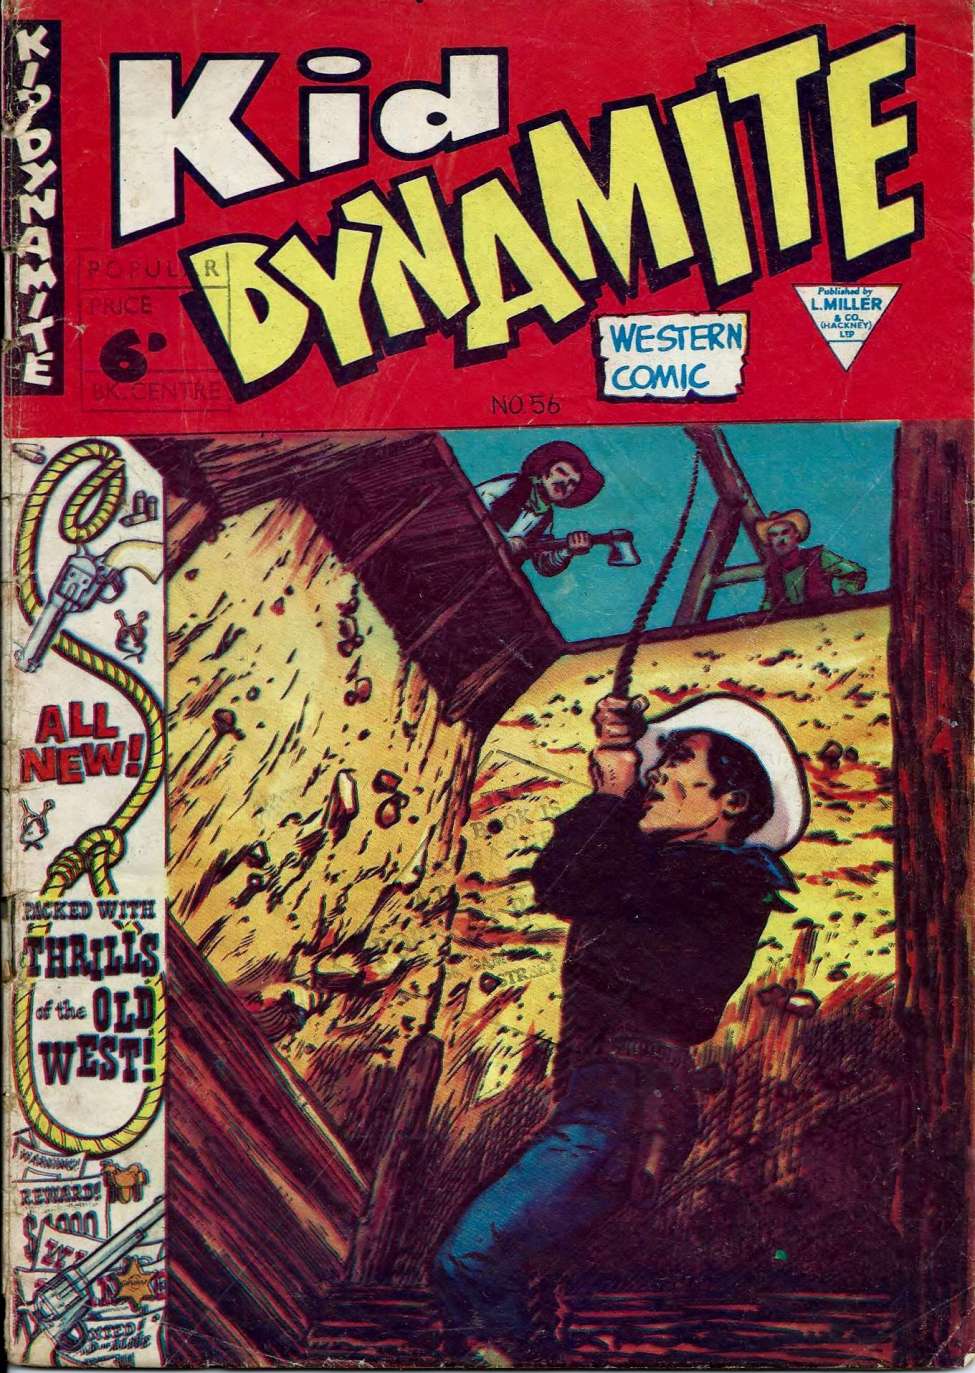 Book Cover For Kid Dynamite Western Comic 56